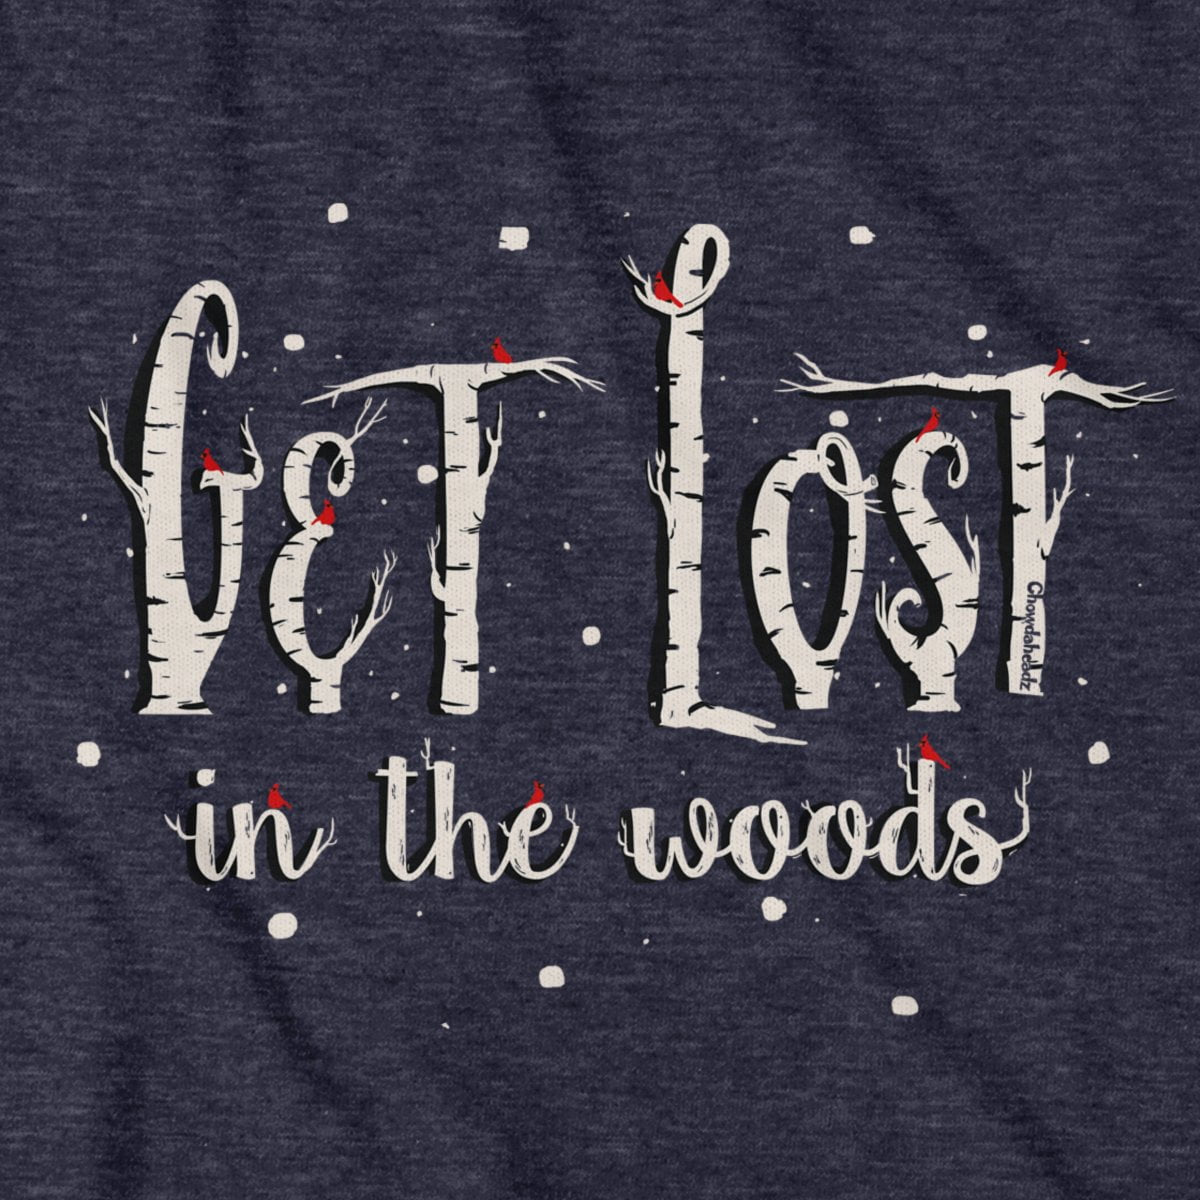 Get Lost in the Woods T-Shirt - Chowdaheadz